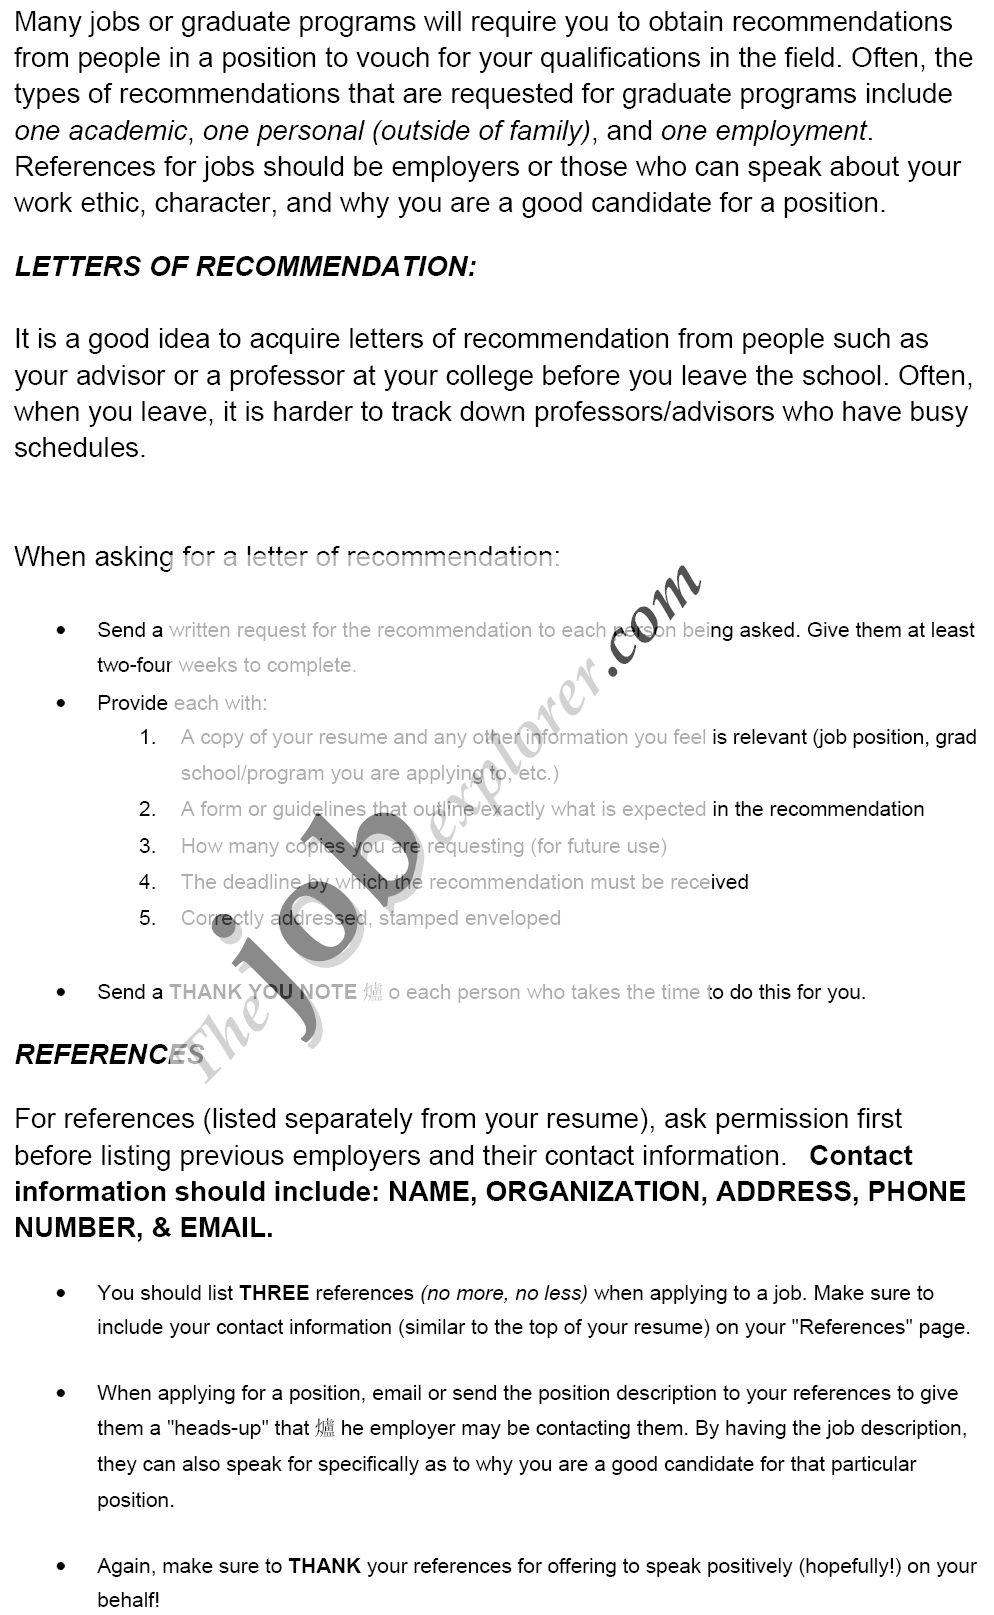 Letter Of Recommendation From Employer Template from www.thejobexplorer.com